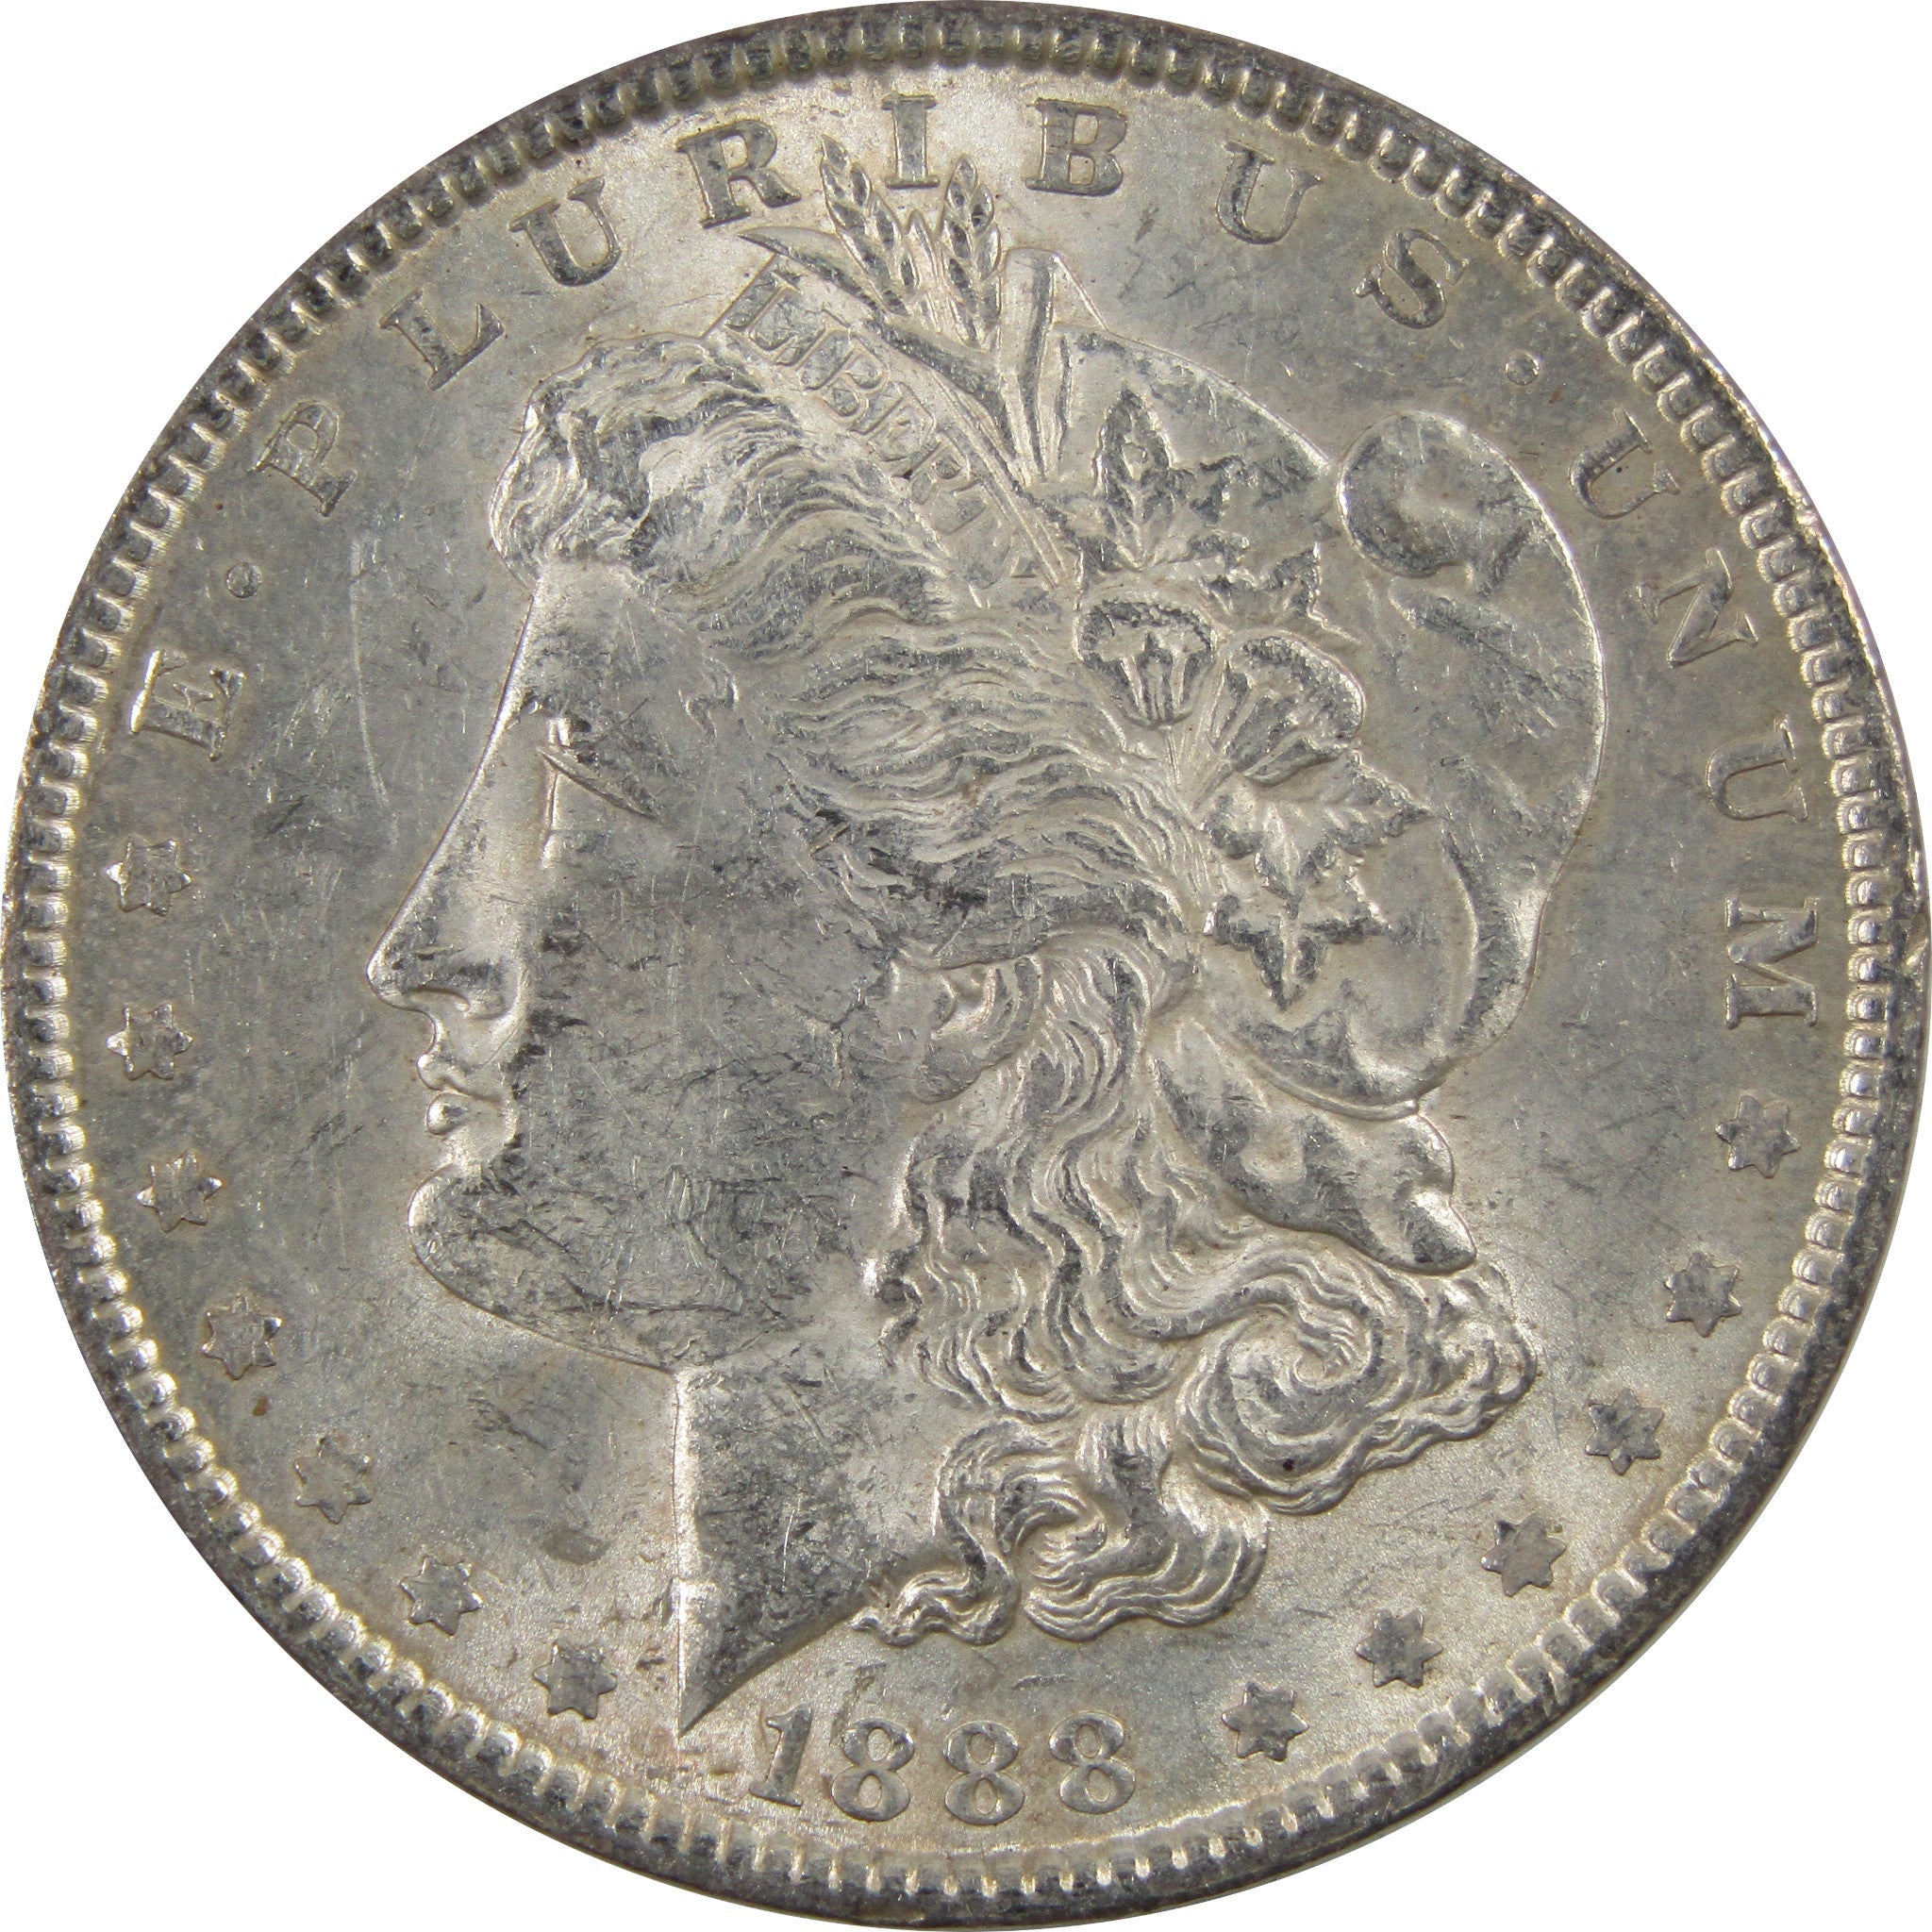 1888 Morgan Dollar AU About Uncirculated 90% Silver $1 Coin SKU:I5499 - Morgan coin - Morgan silver dollar - Morgan silver dollar for sale - Profile Coins &amp; Collectibles